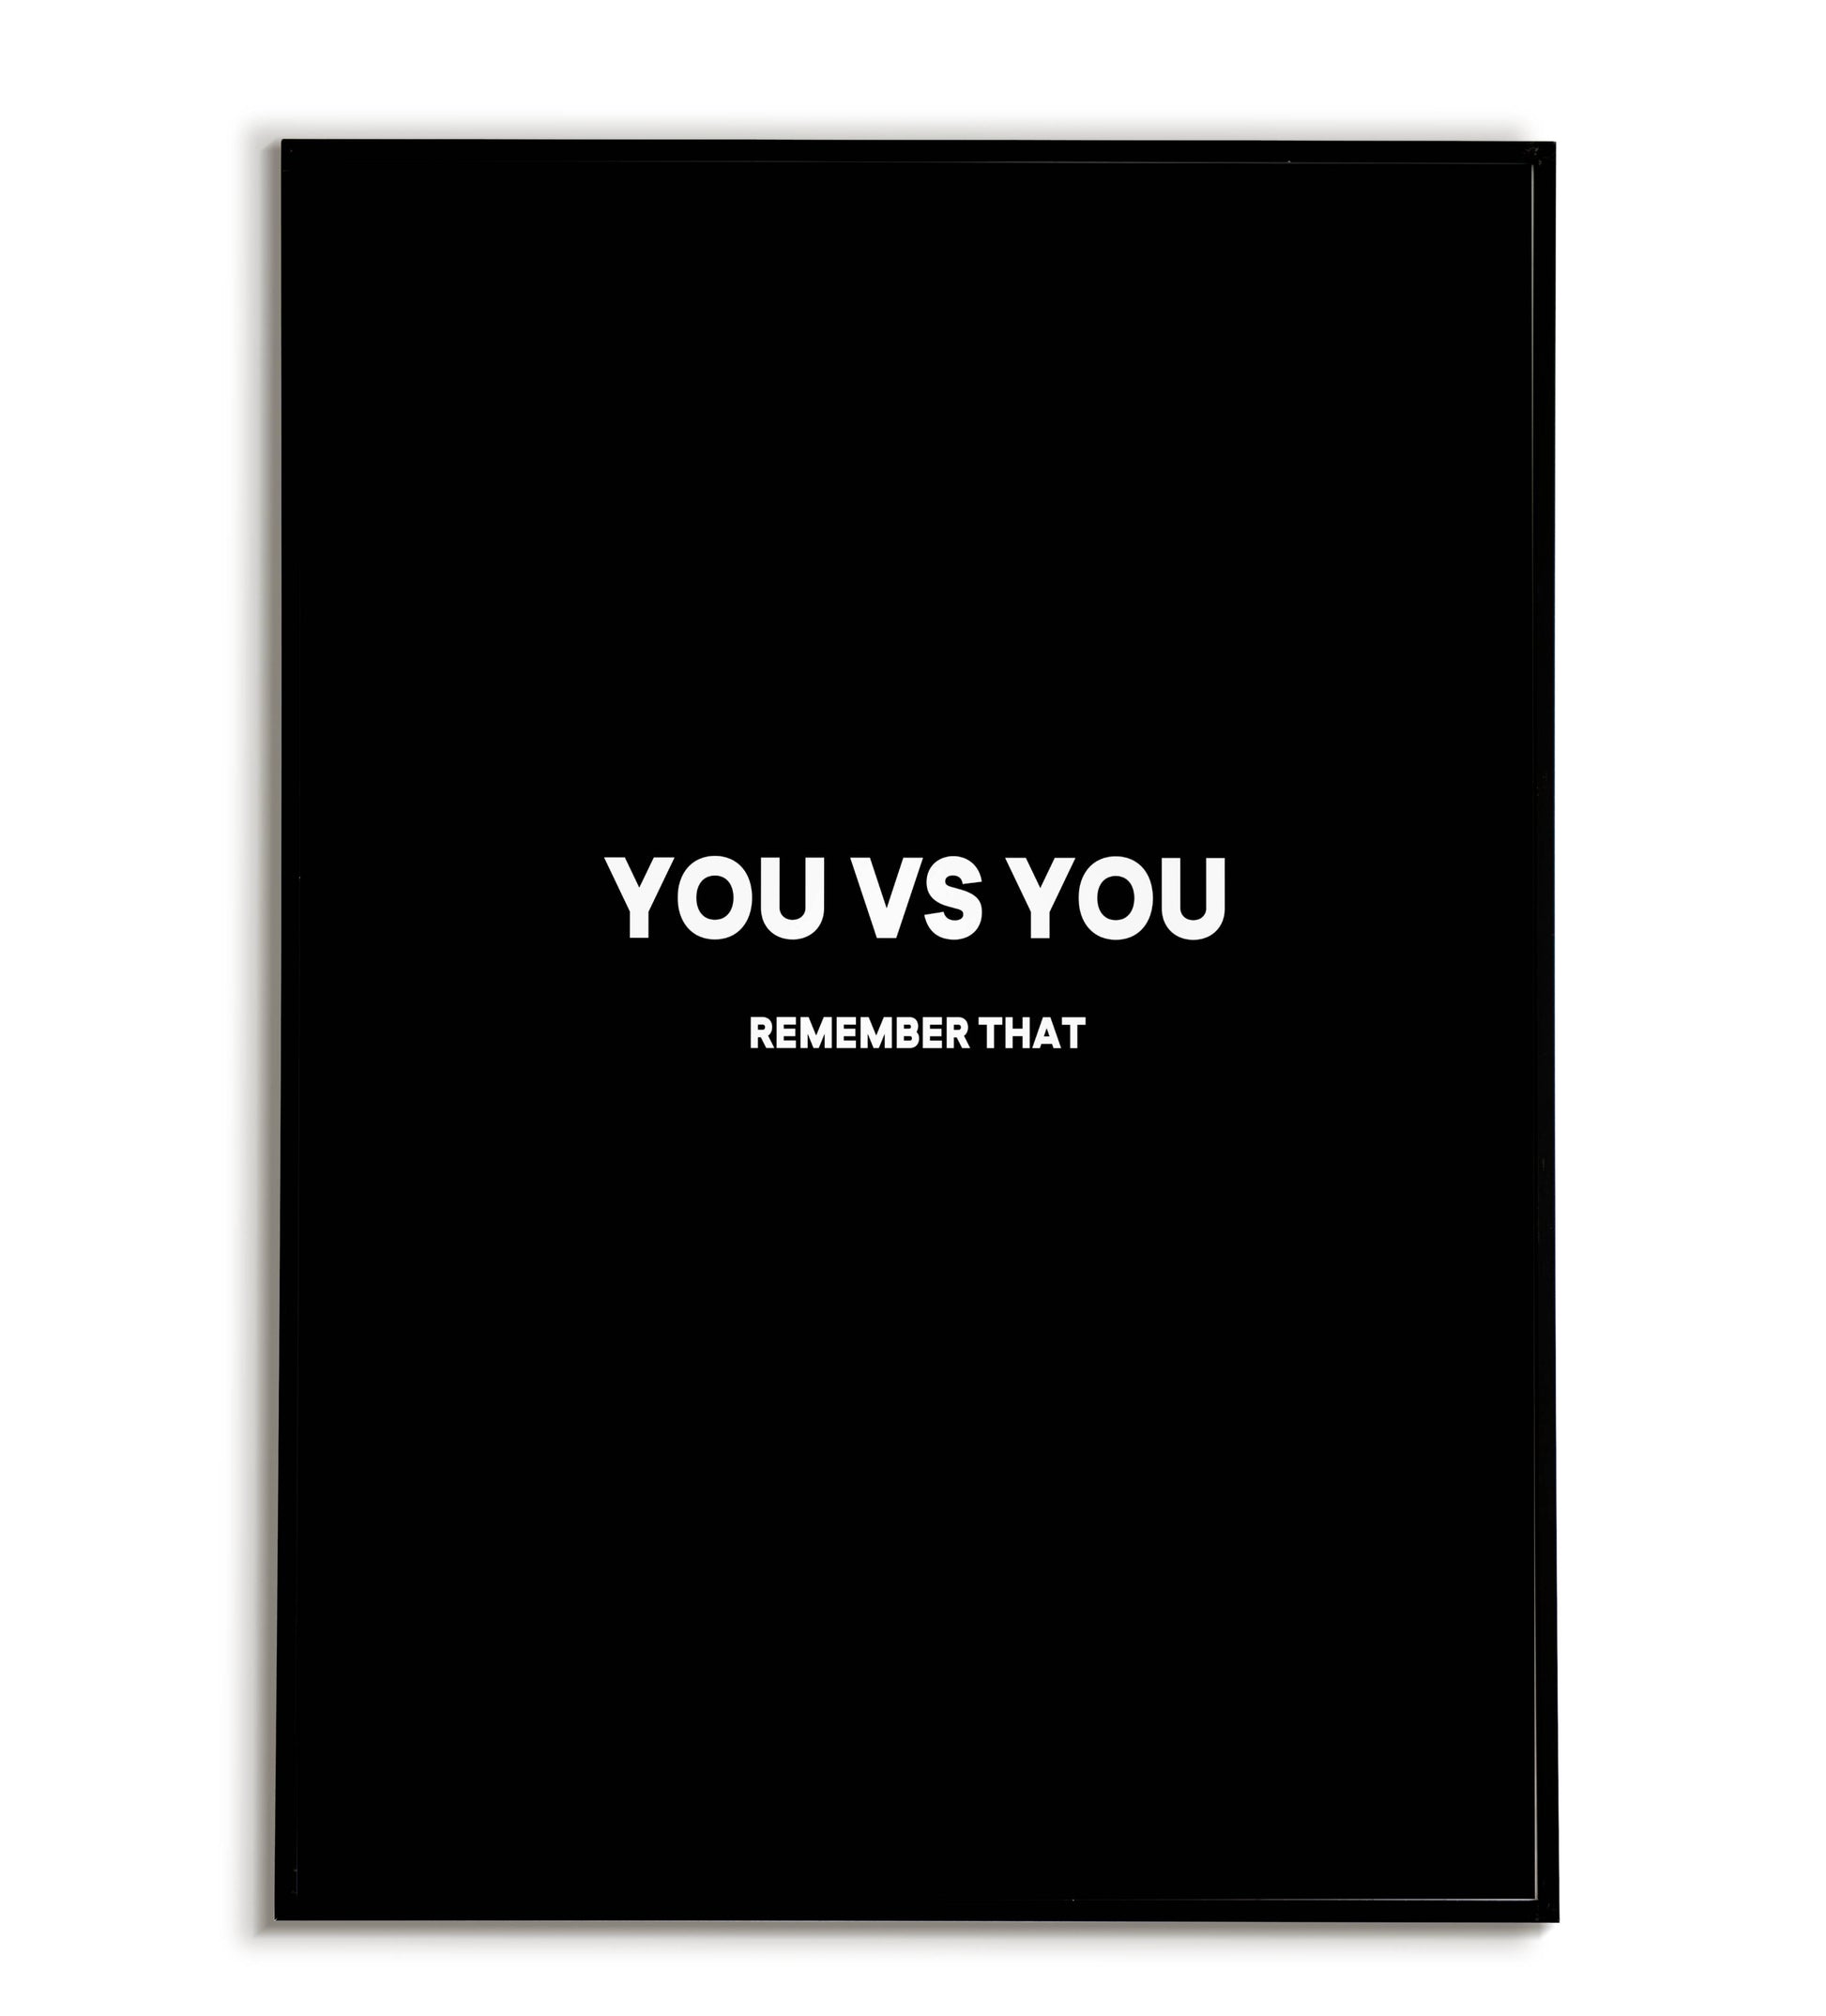 YOU VS YOU Remember That printable wall art poster. Motivational quote about self-improvement.